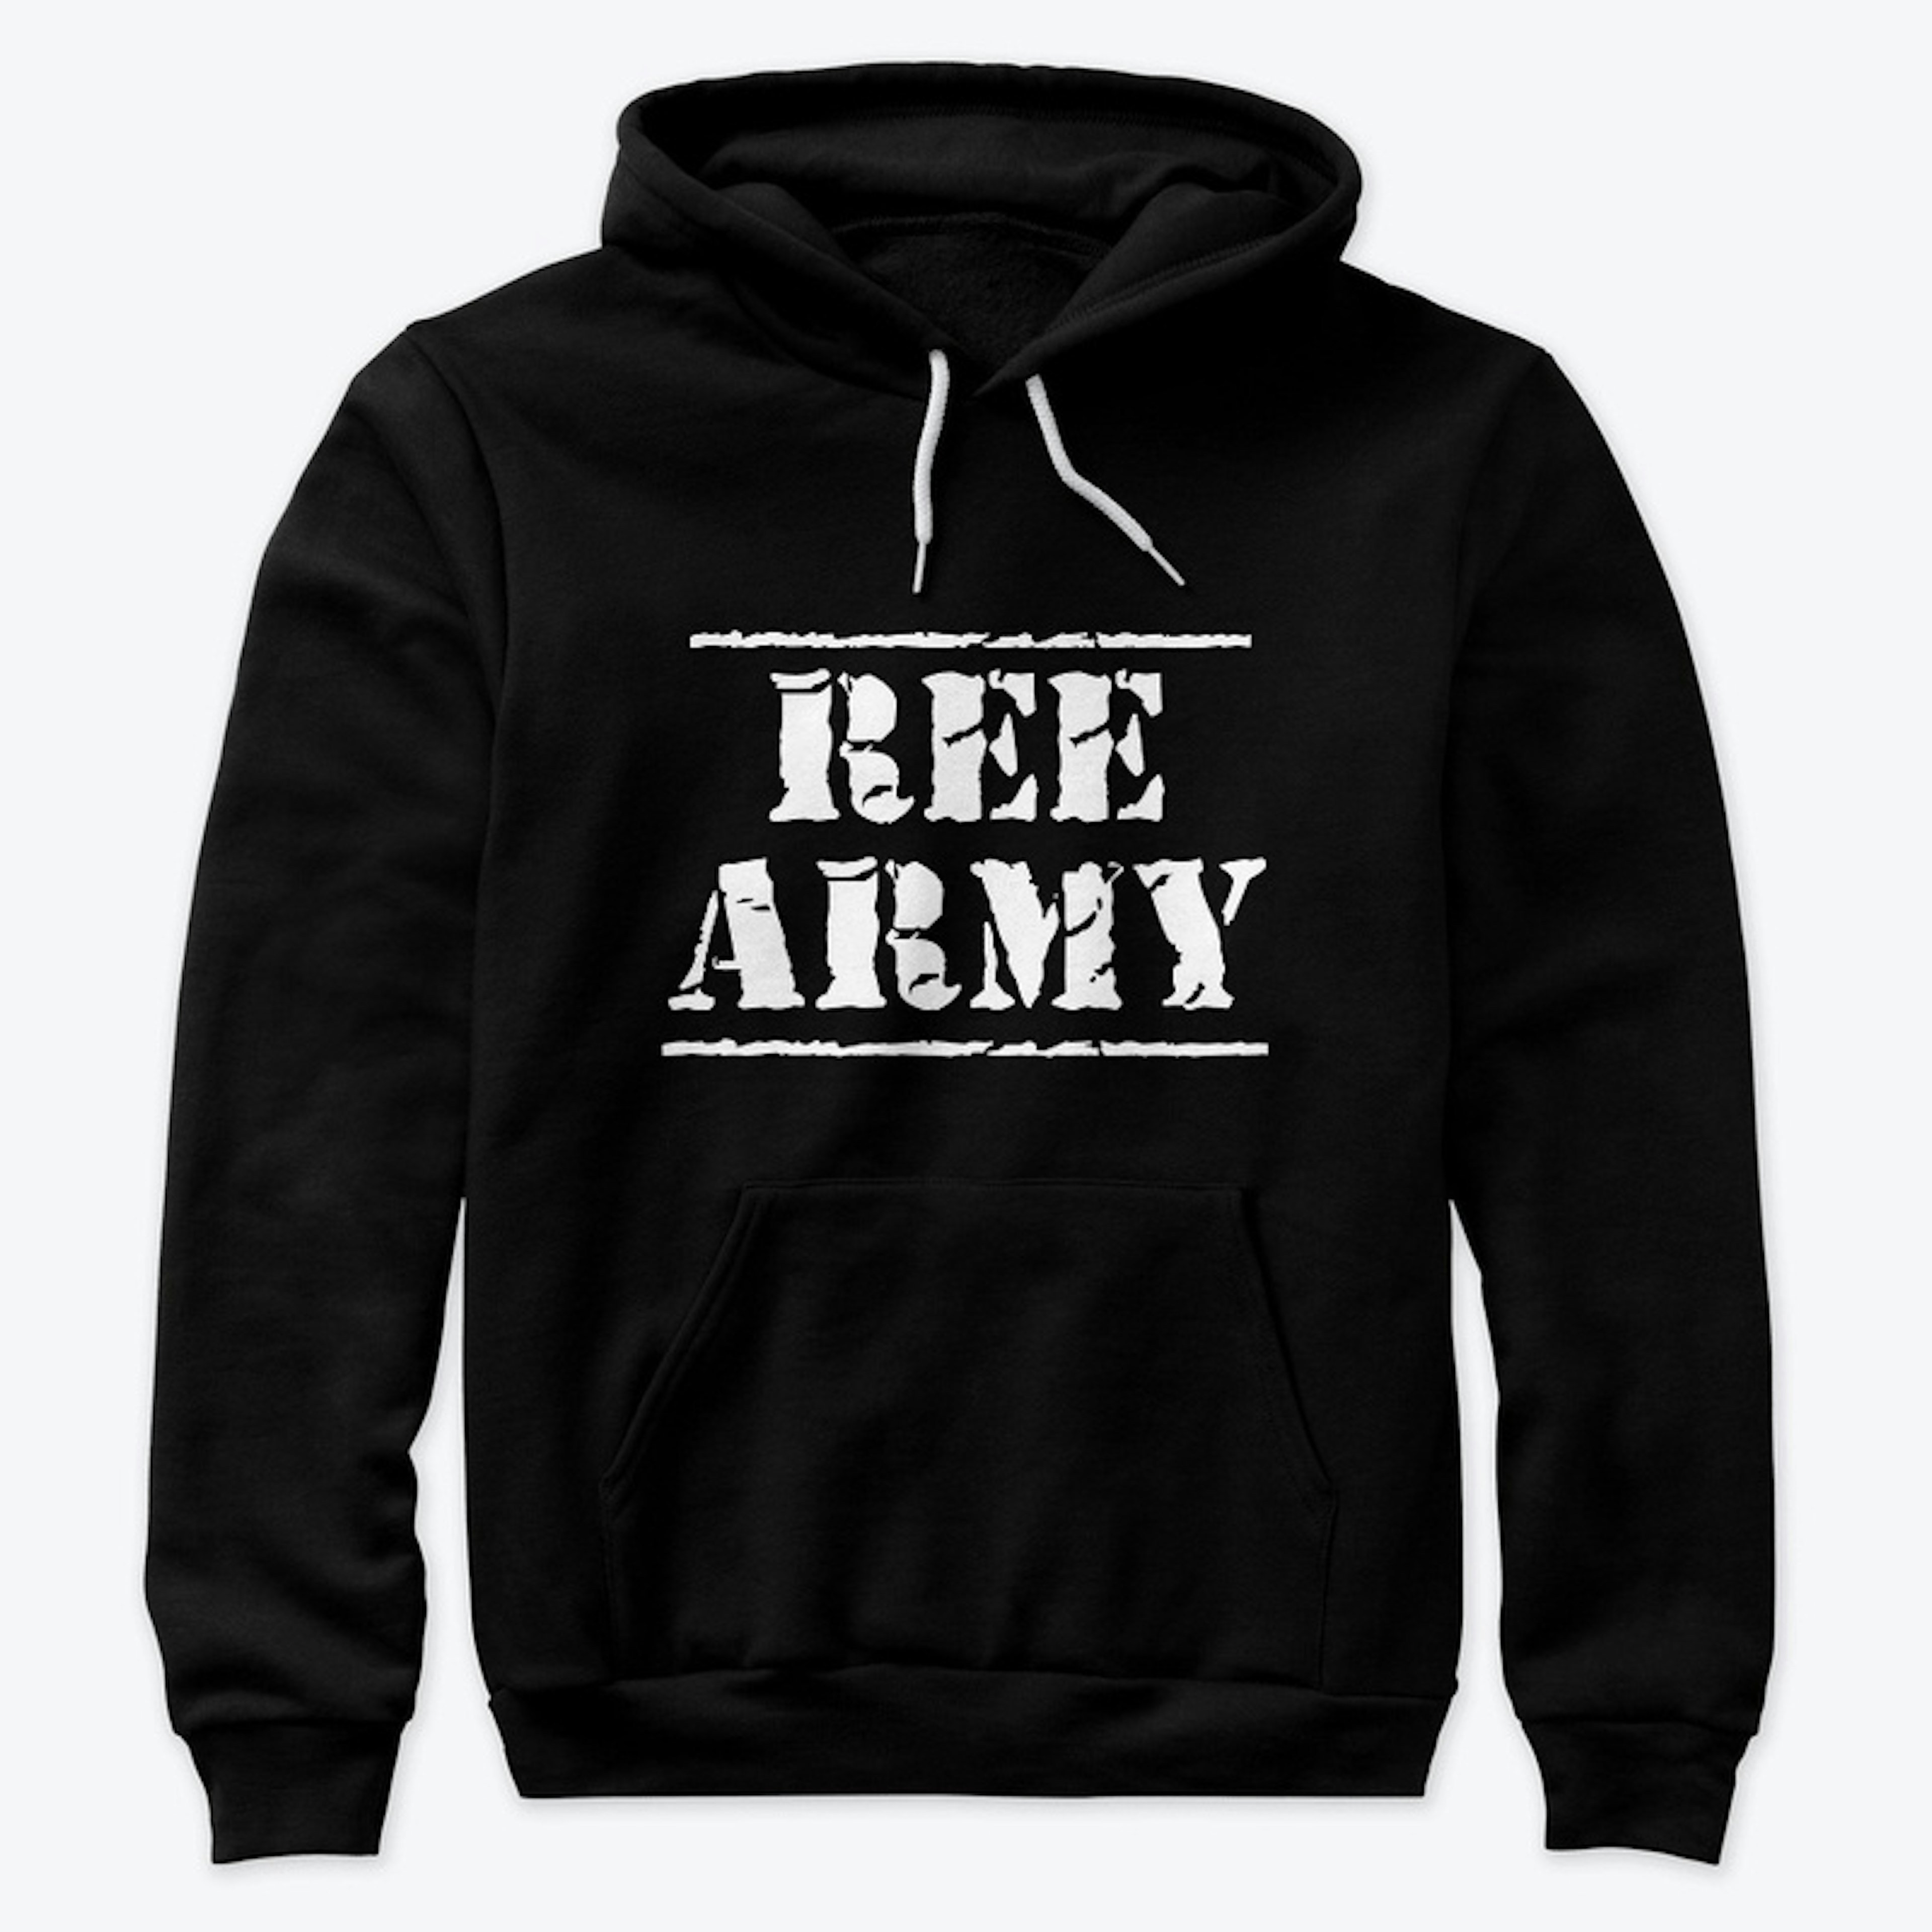 REE ARMY Official Merch!